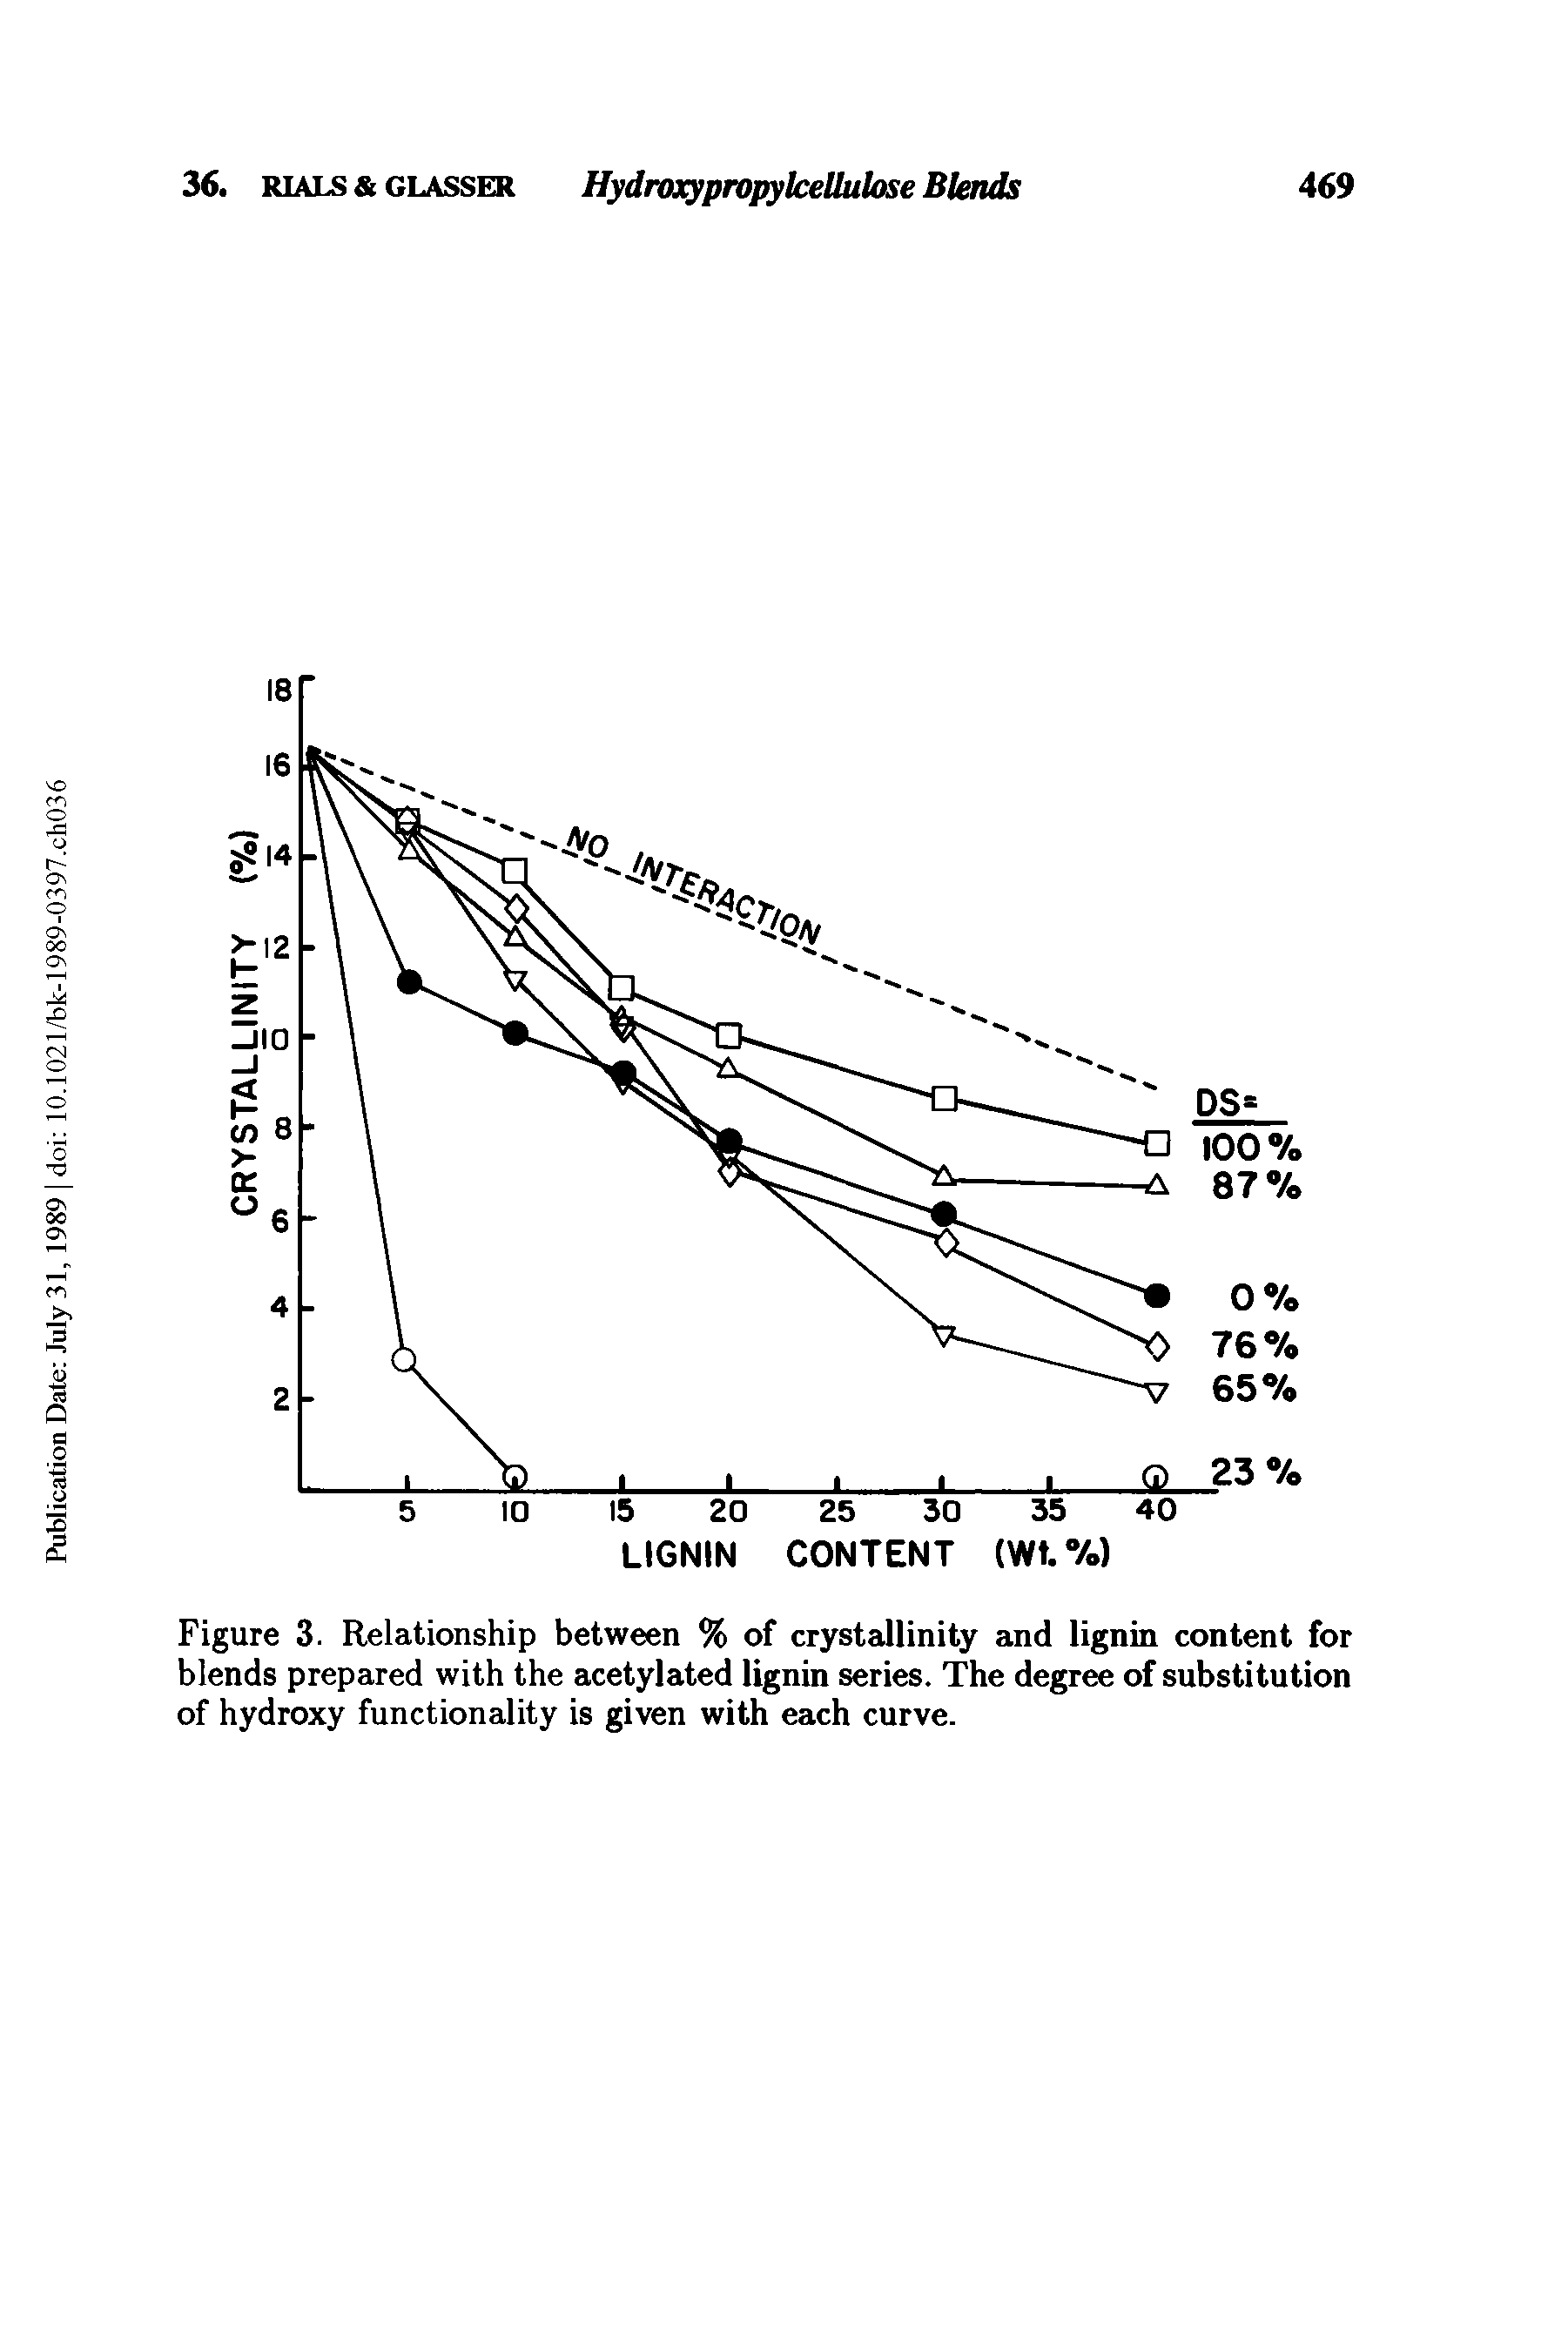 Figure 3. Relationship between % of crystallinity and lignin content for blends prepared with the acetylated lignin series. The degree of substitution of hydroxy functionality is given with each curve.